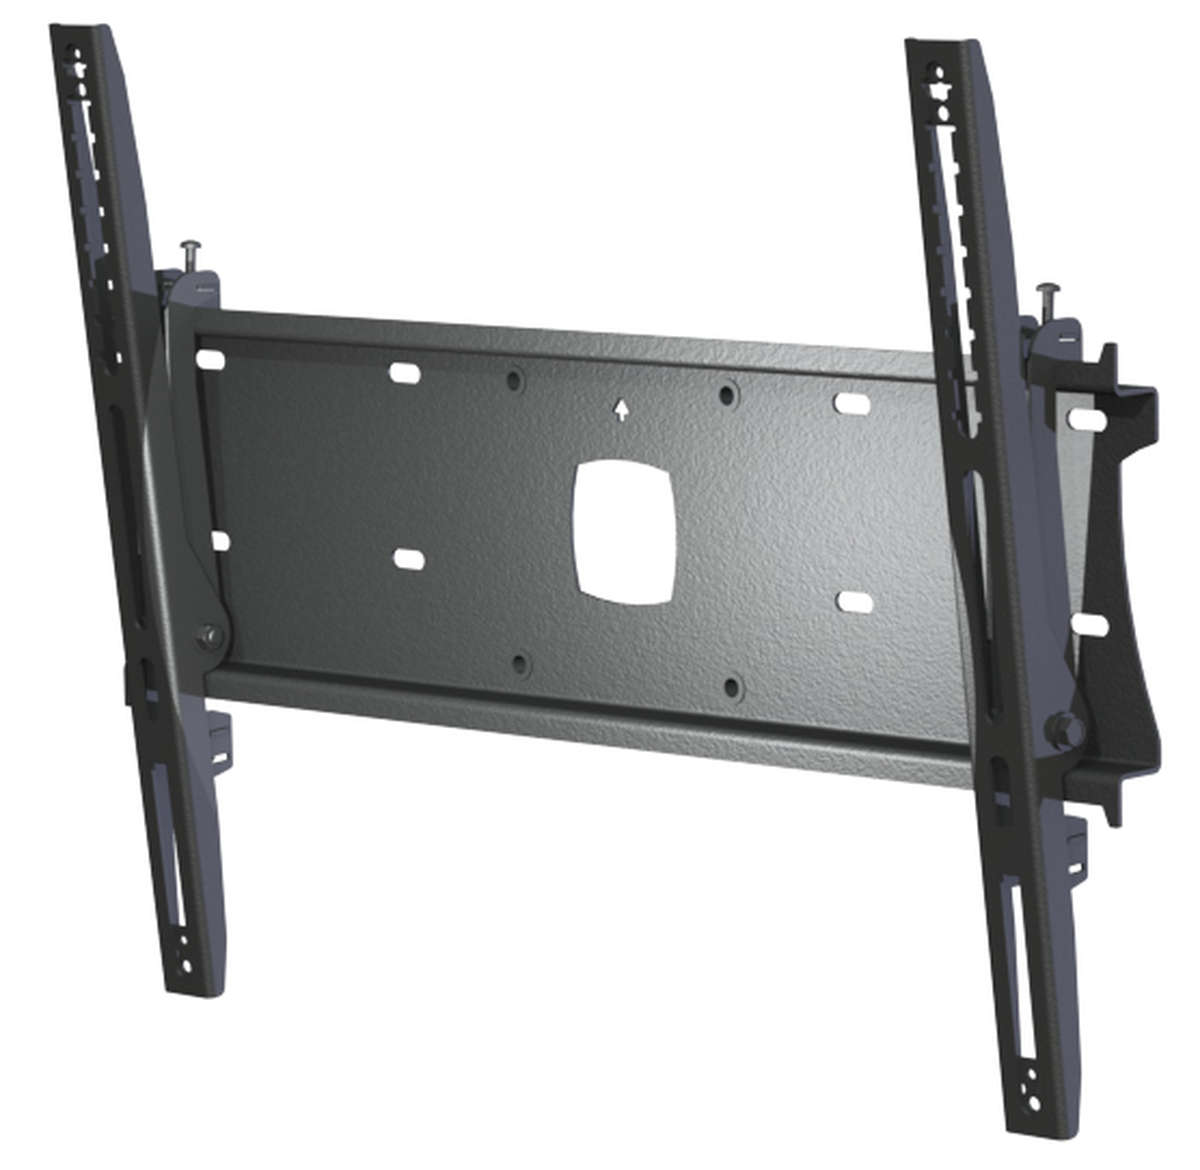 Unicol PZW8 Pozimount tilting wall bracket for monitors and TVs from 58 to 70 inches product image